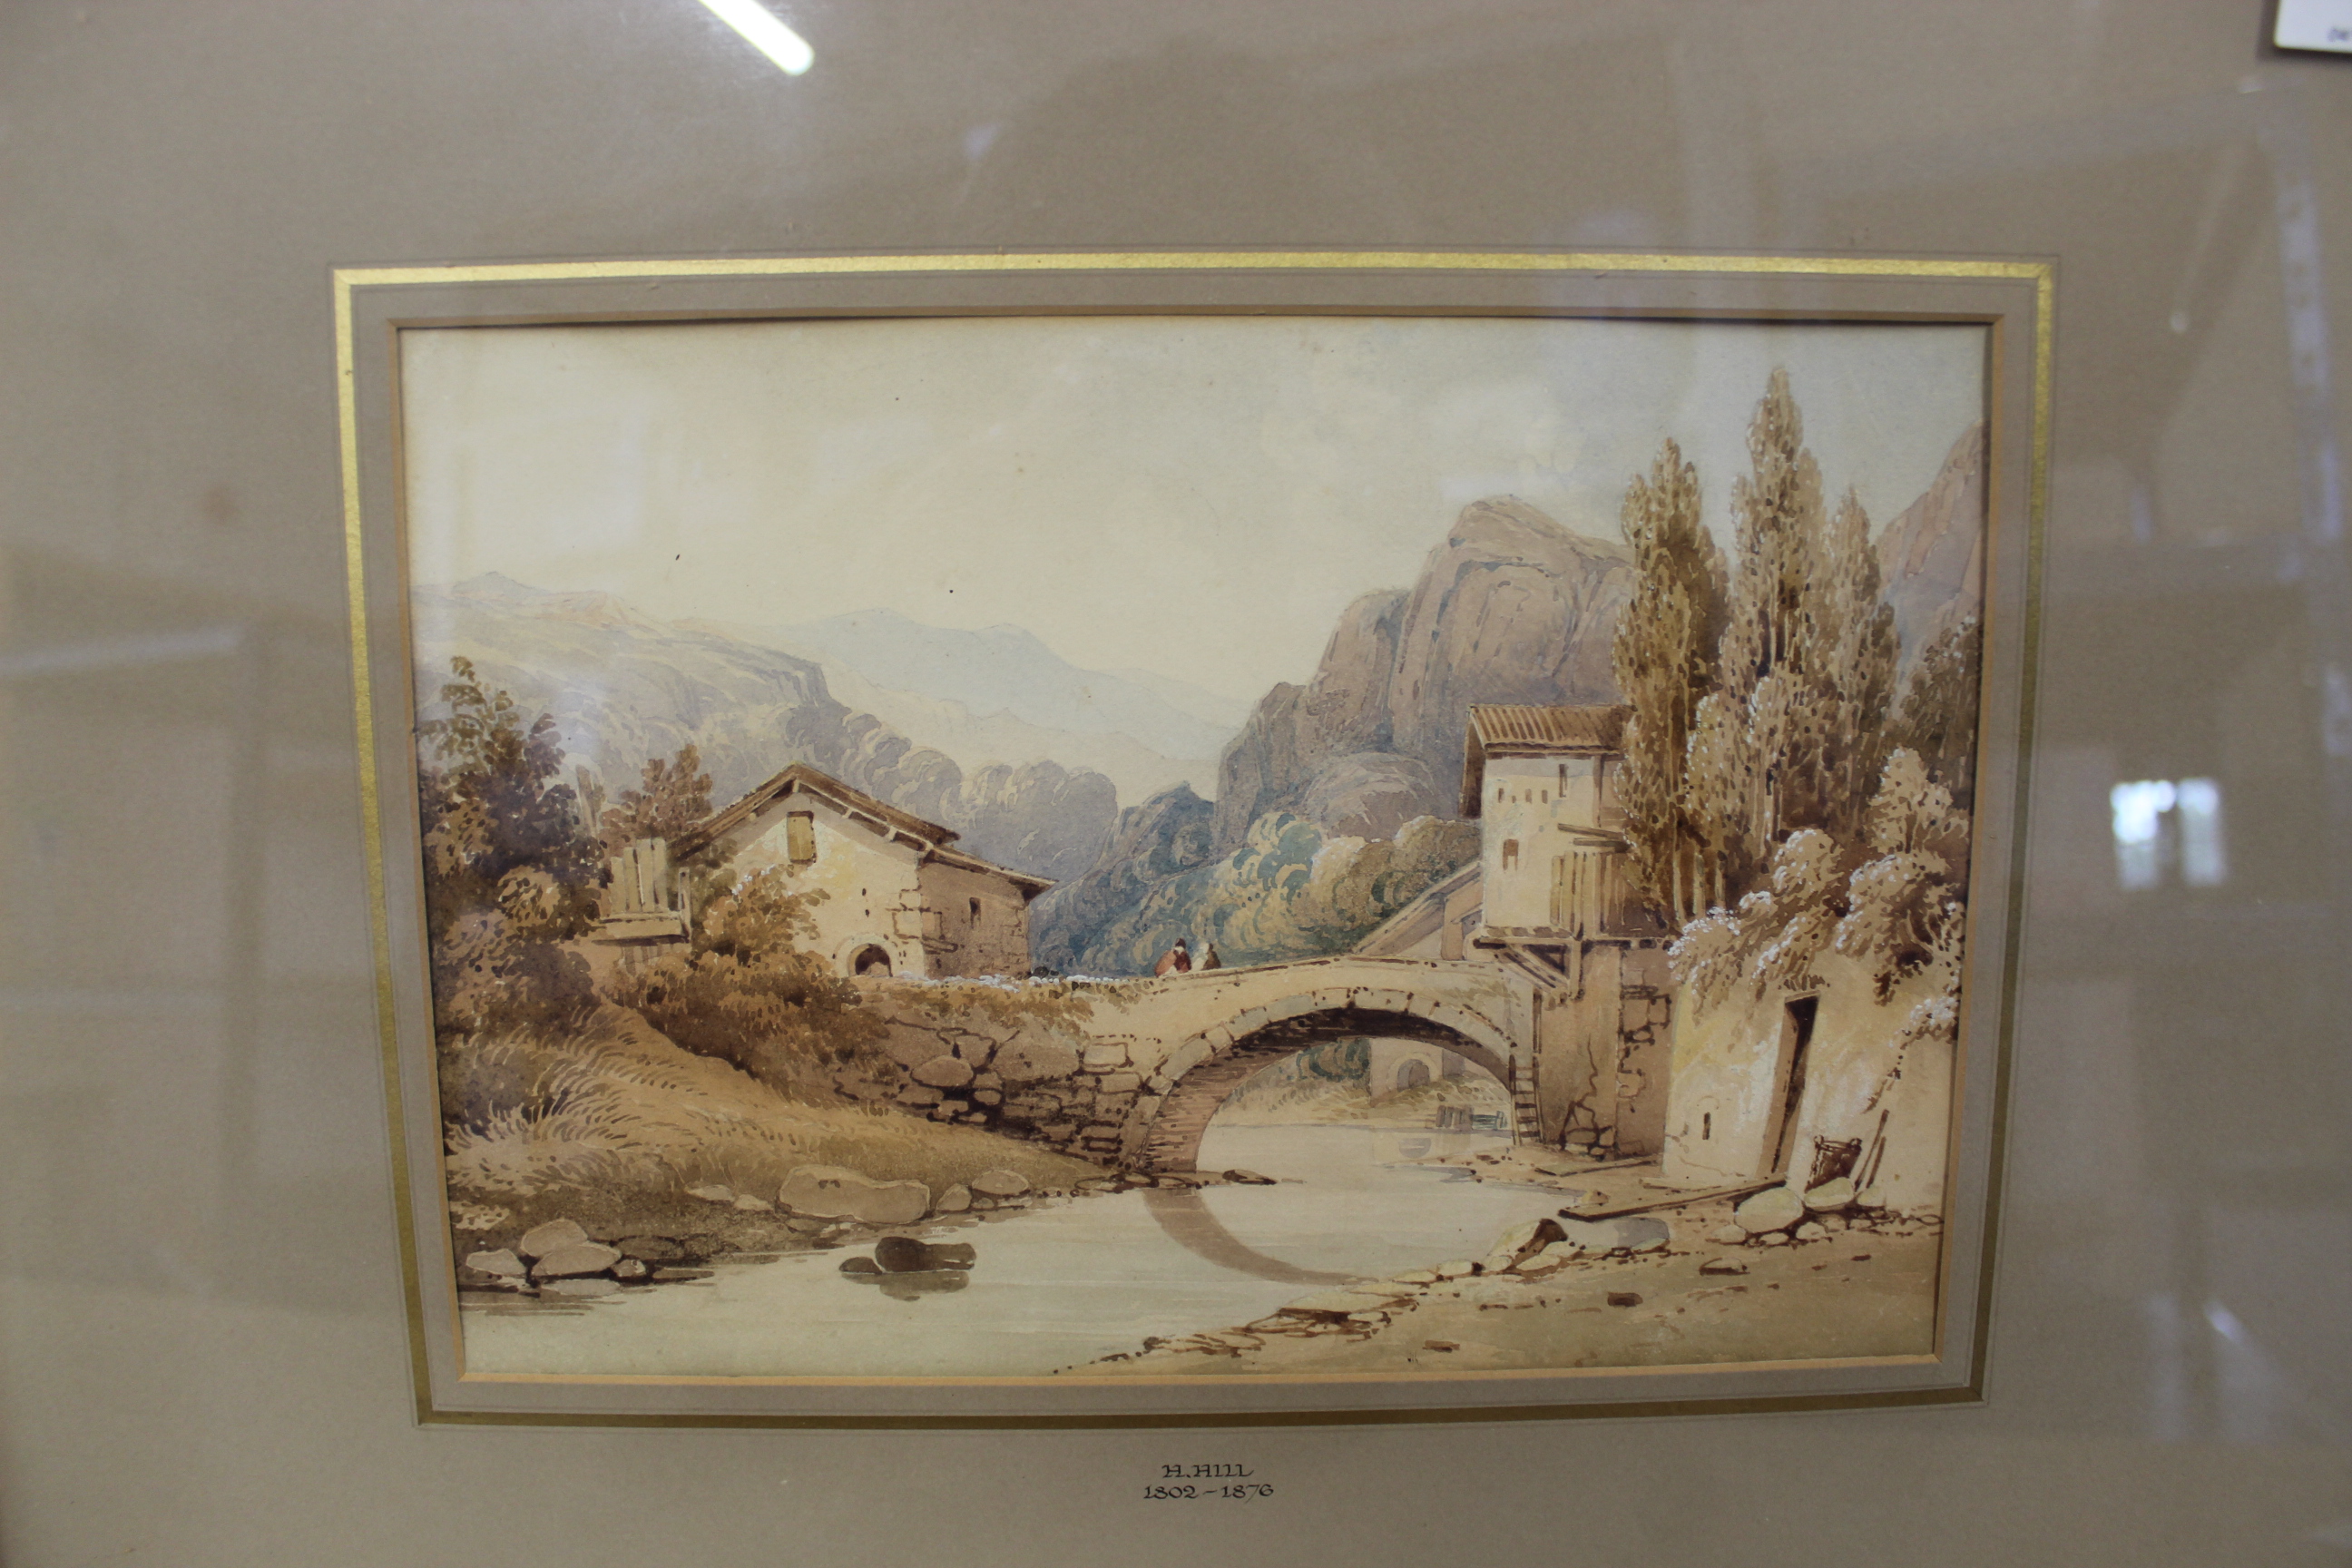 A framed watercolour inscribed on mount 'H Hill 1802-1876' of a mountain village with bridge, - Image 4 of 4